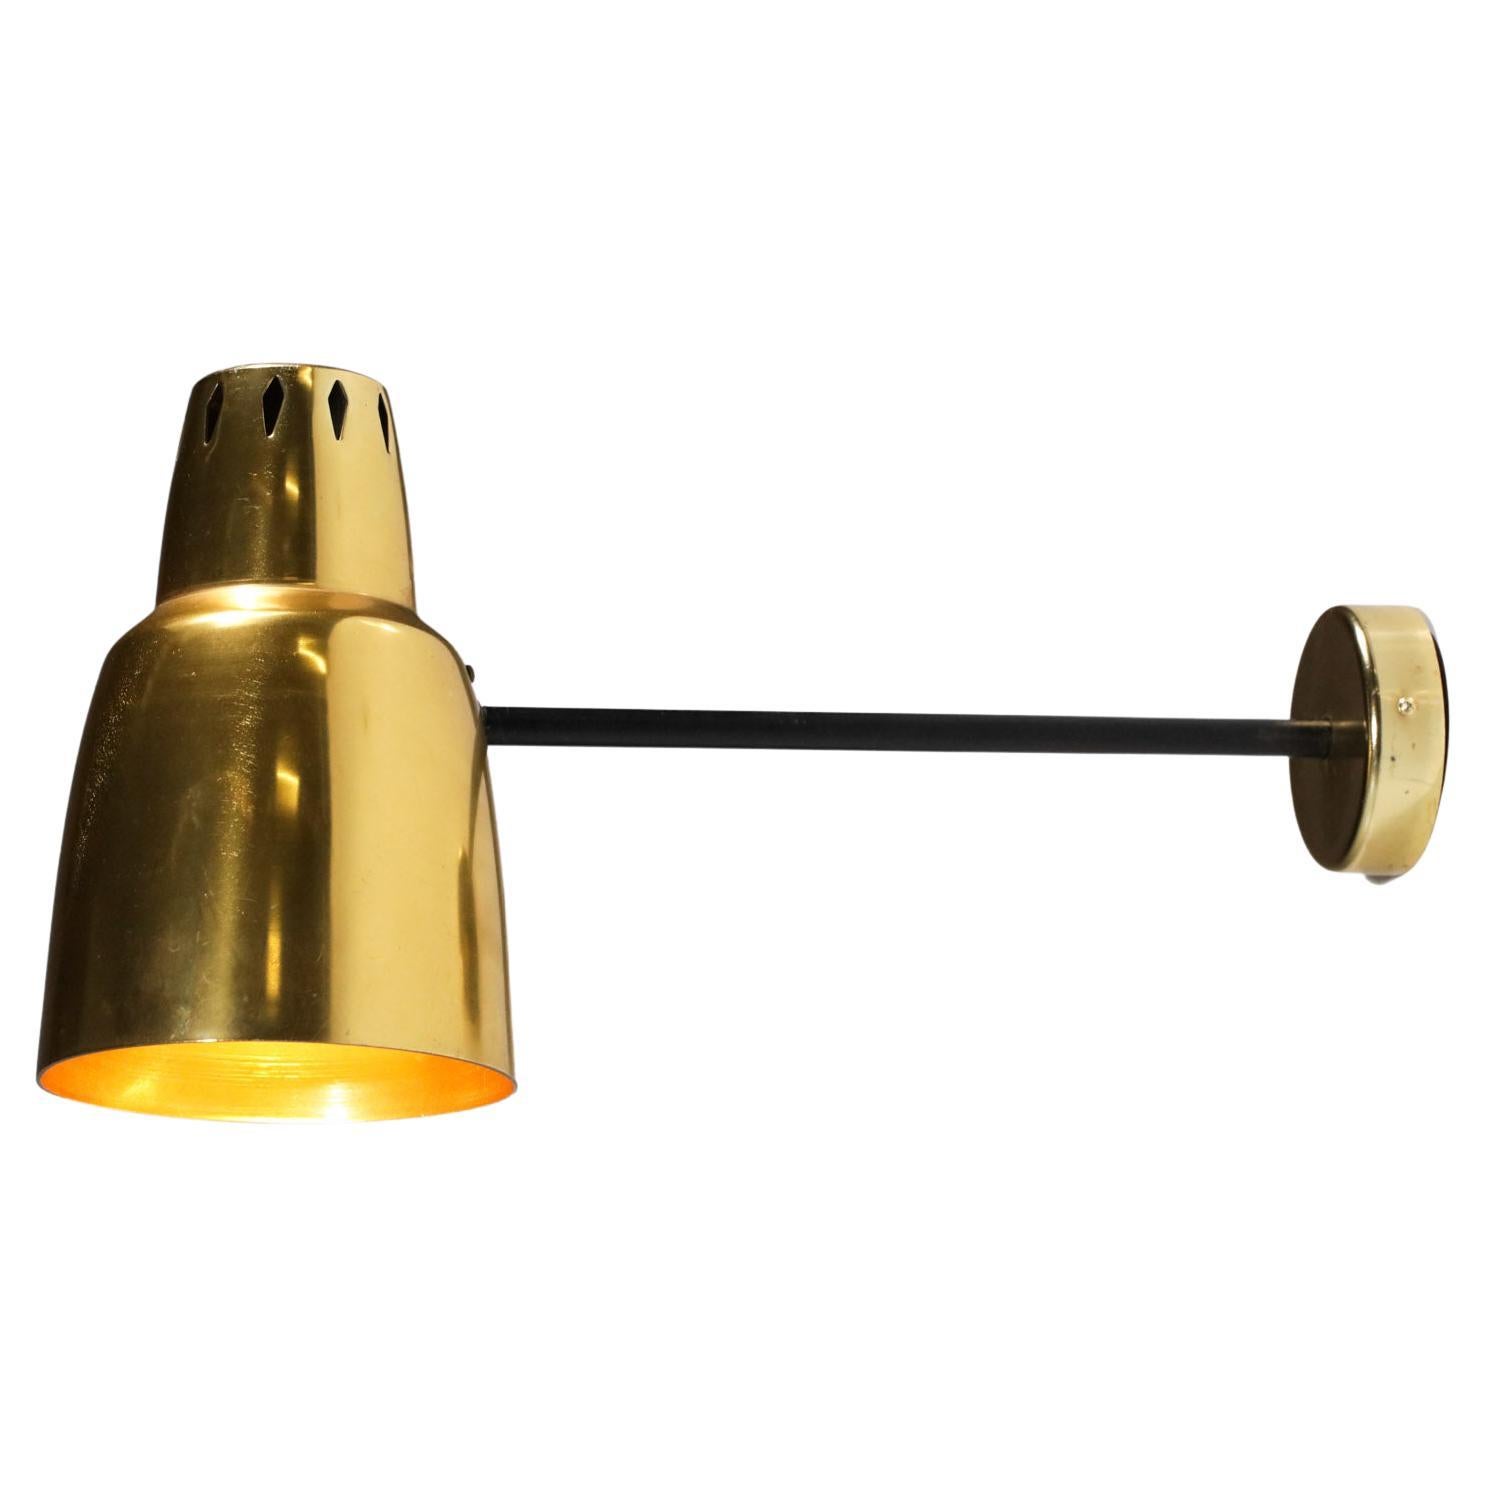 Parscot 60's Vintage Gilded Wall Lamp in Solid Brass For Sale